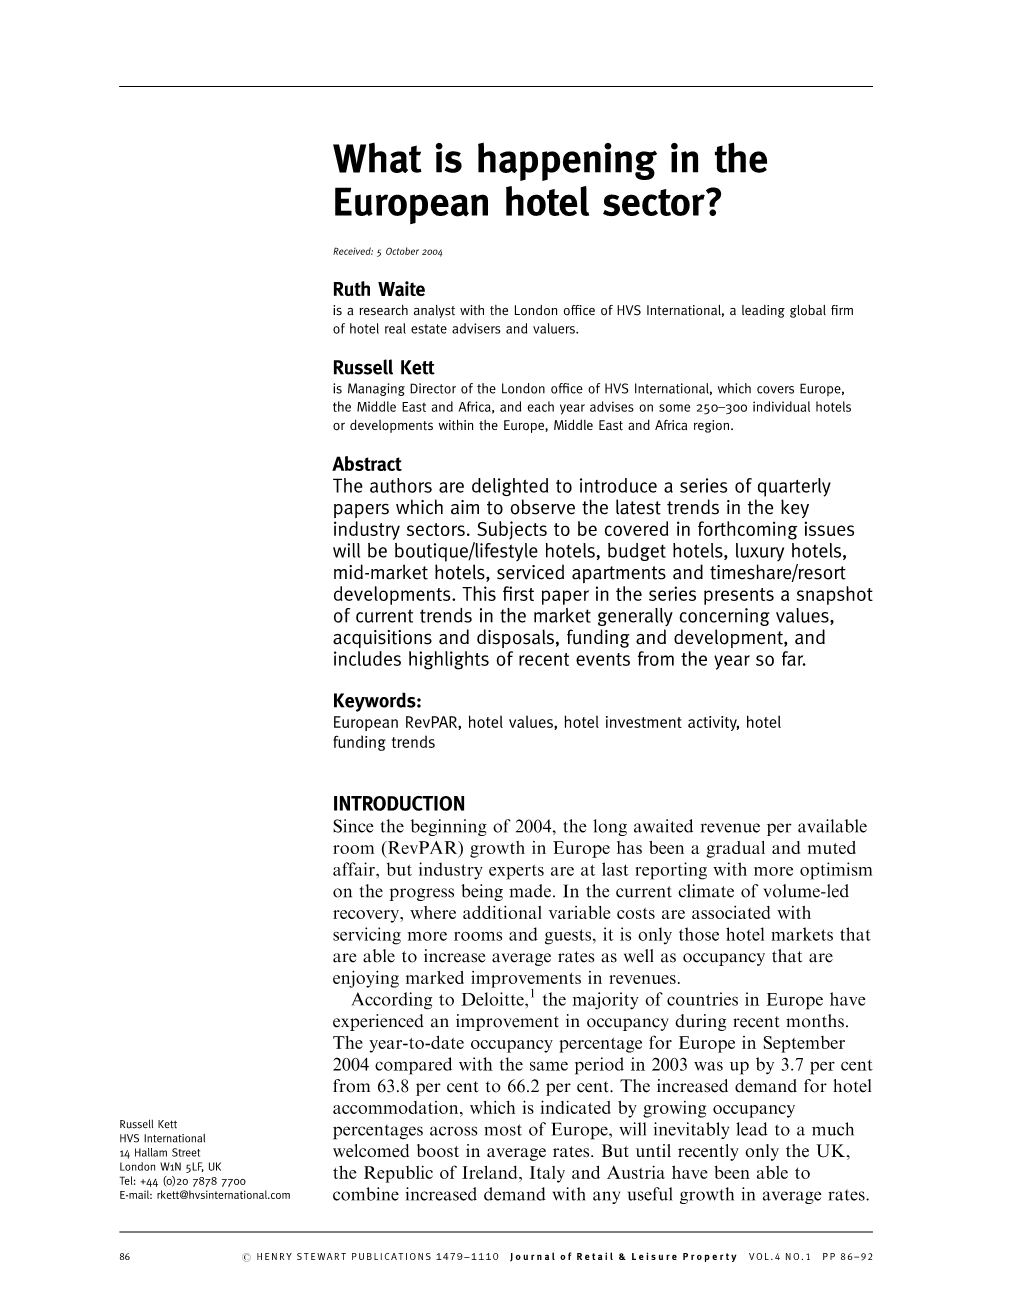 What Is Happening in the European Hotel Sector?